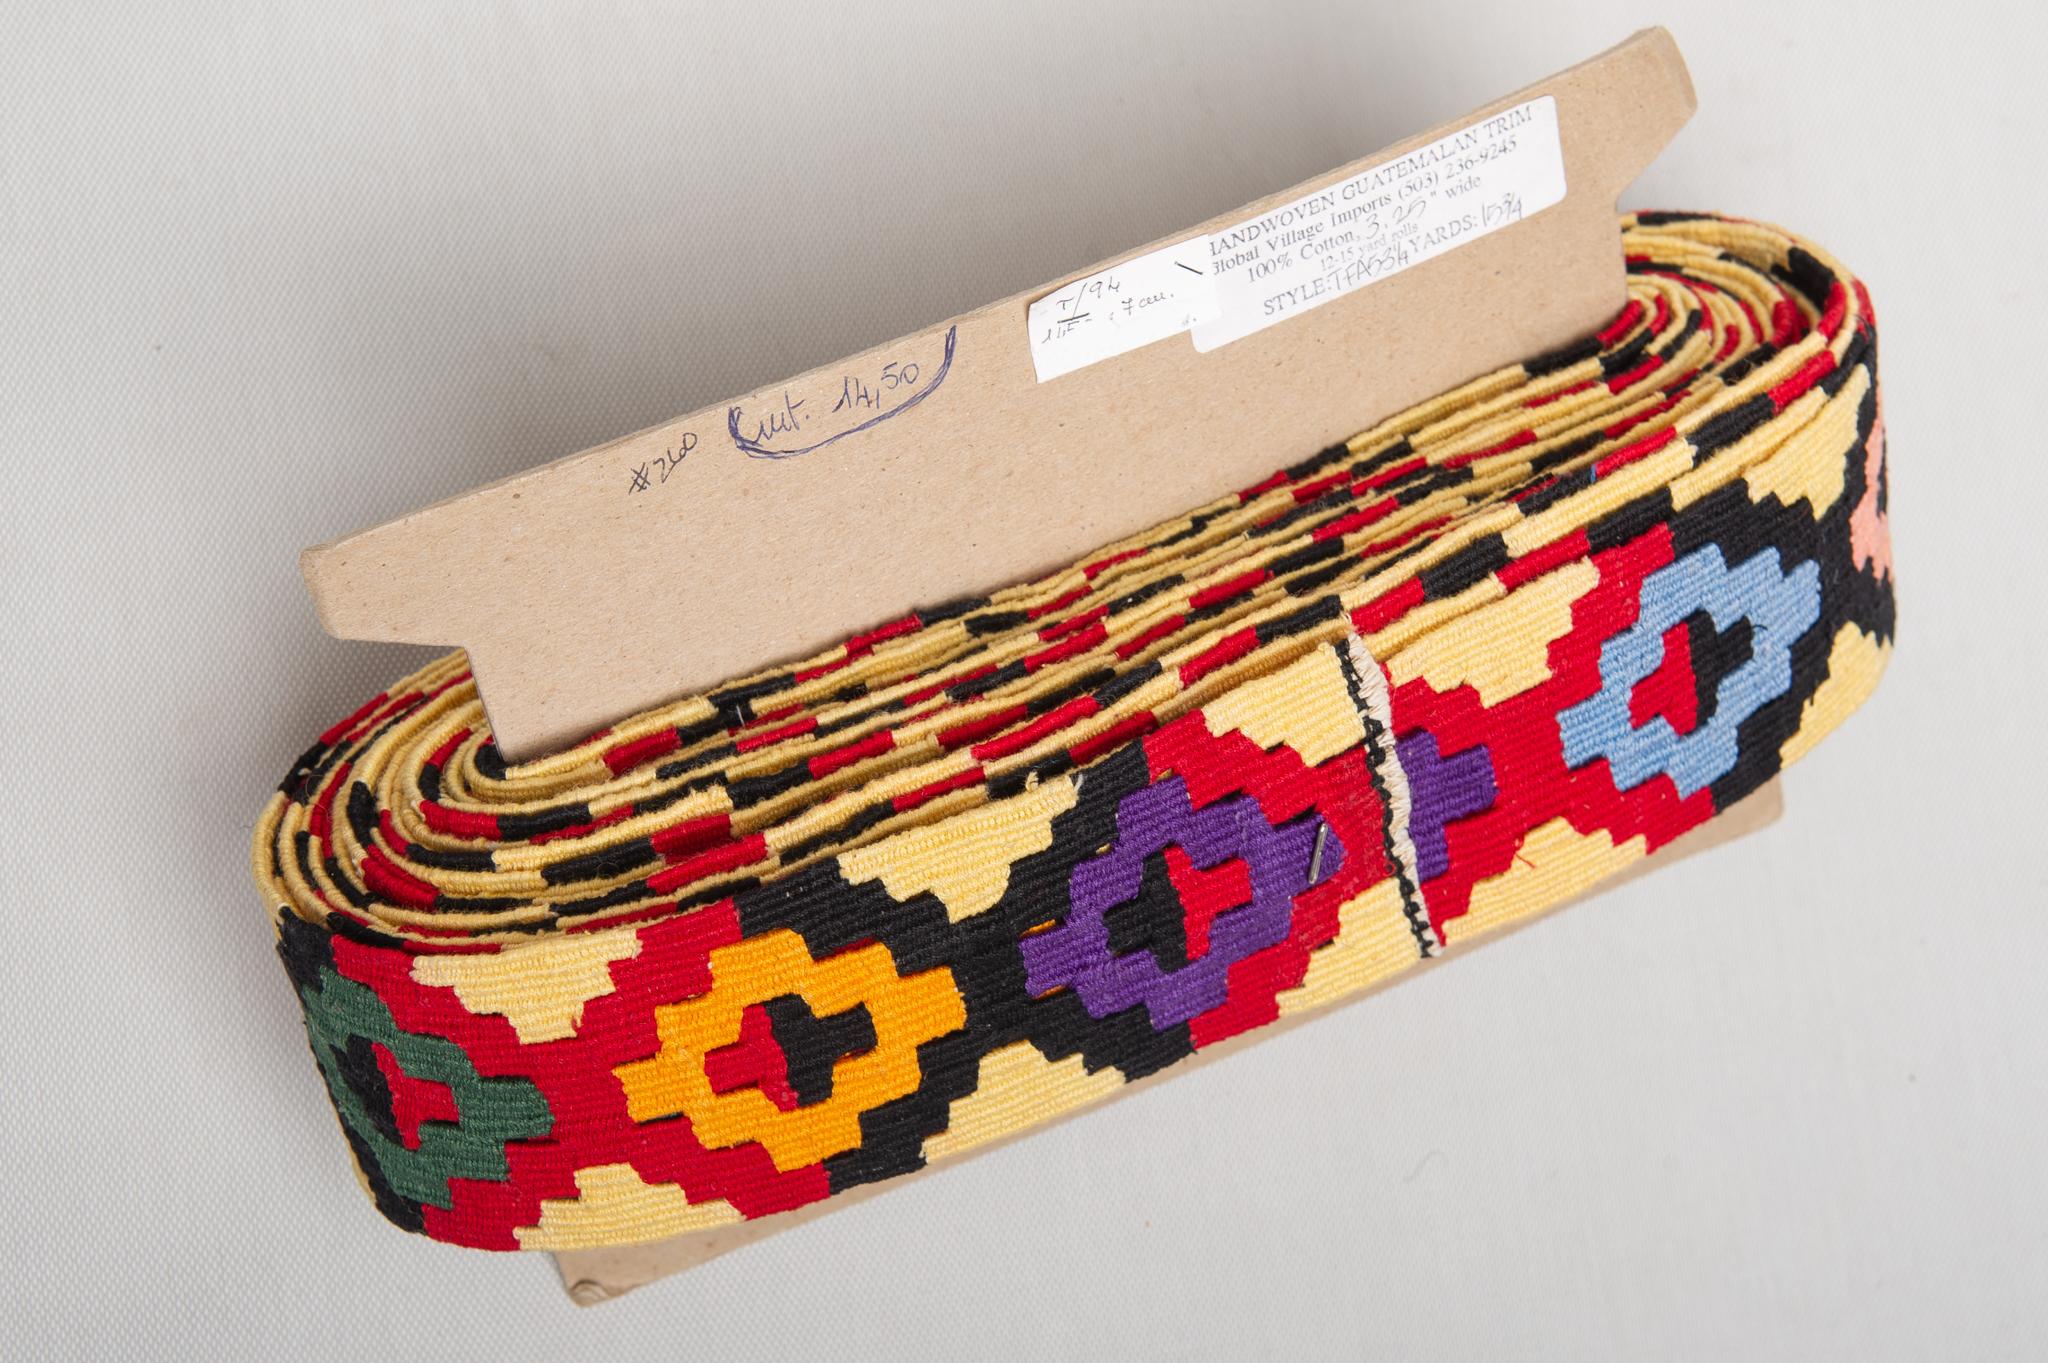 Rare polychrome kilim border from Guatemala, completely hand made on loom.
It's interesting for ...something in Your home: around a blanket or... tell me Your ideas.